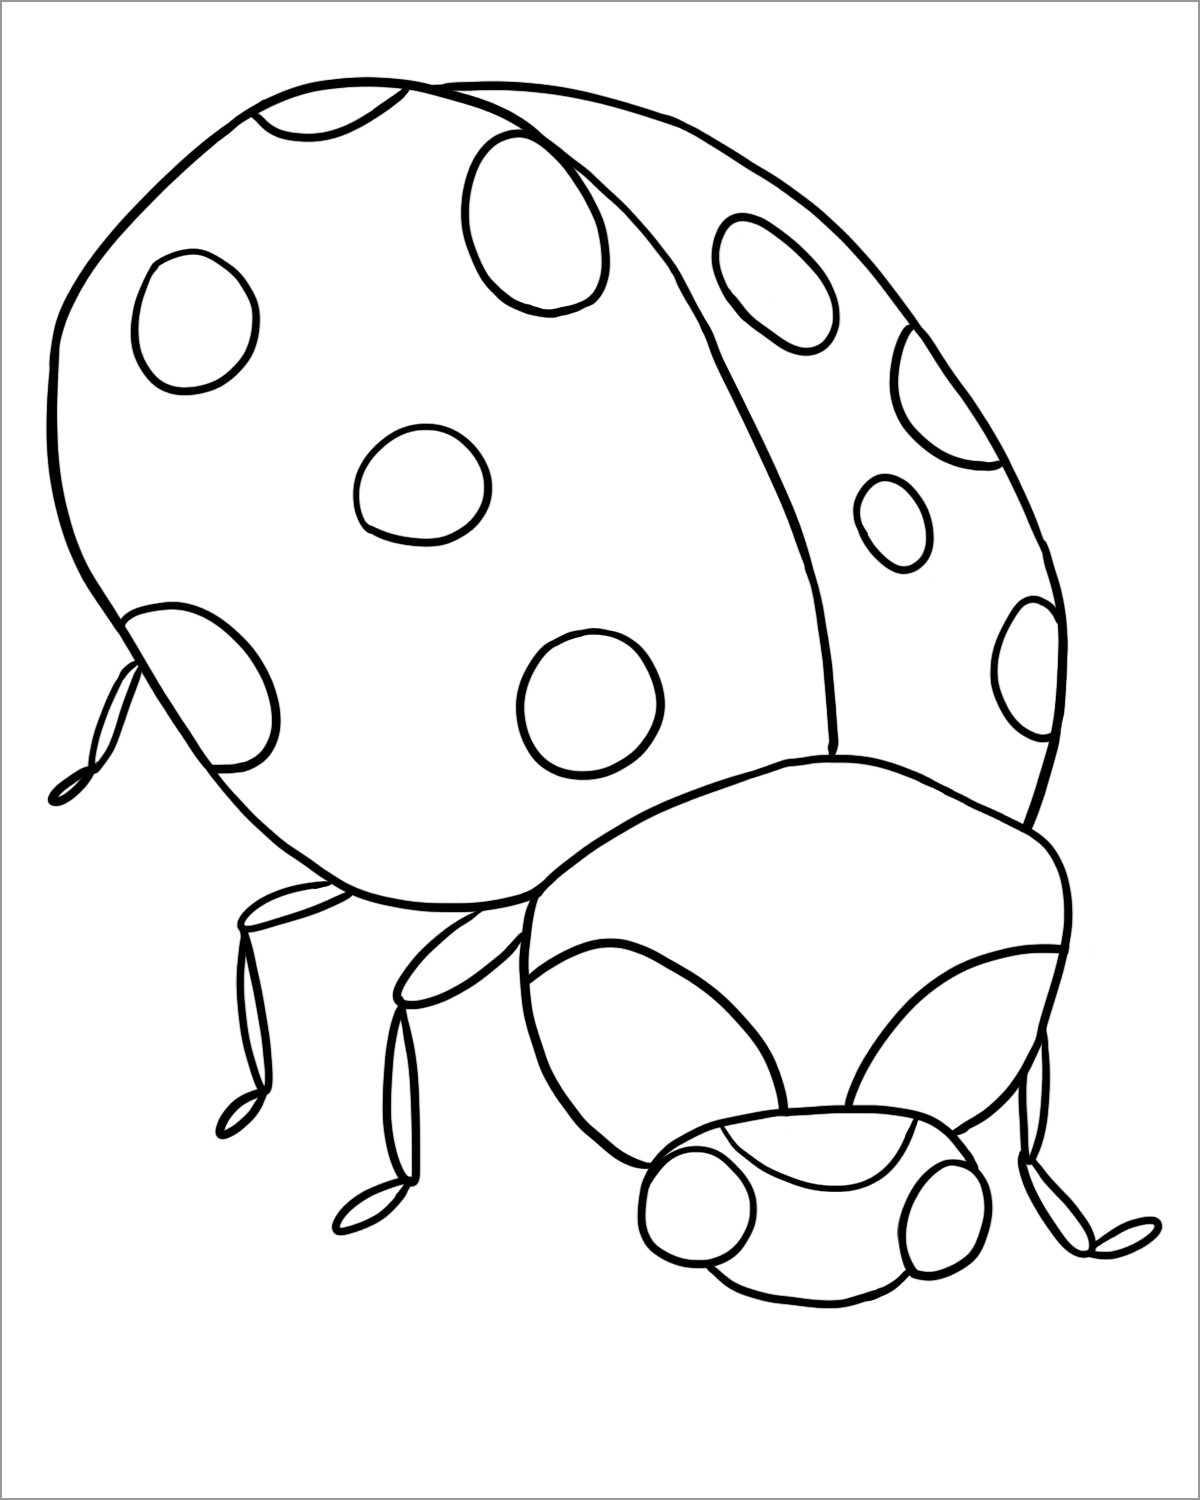 Coloring Page Of A Ladybug